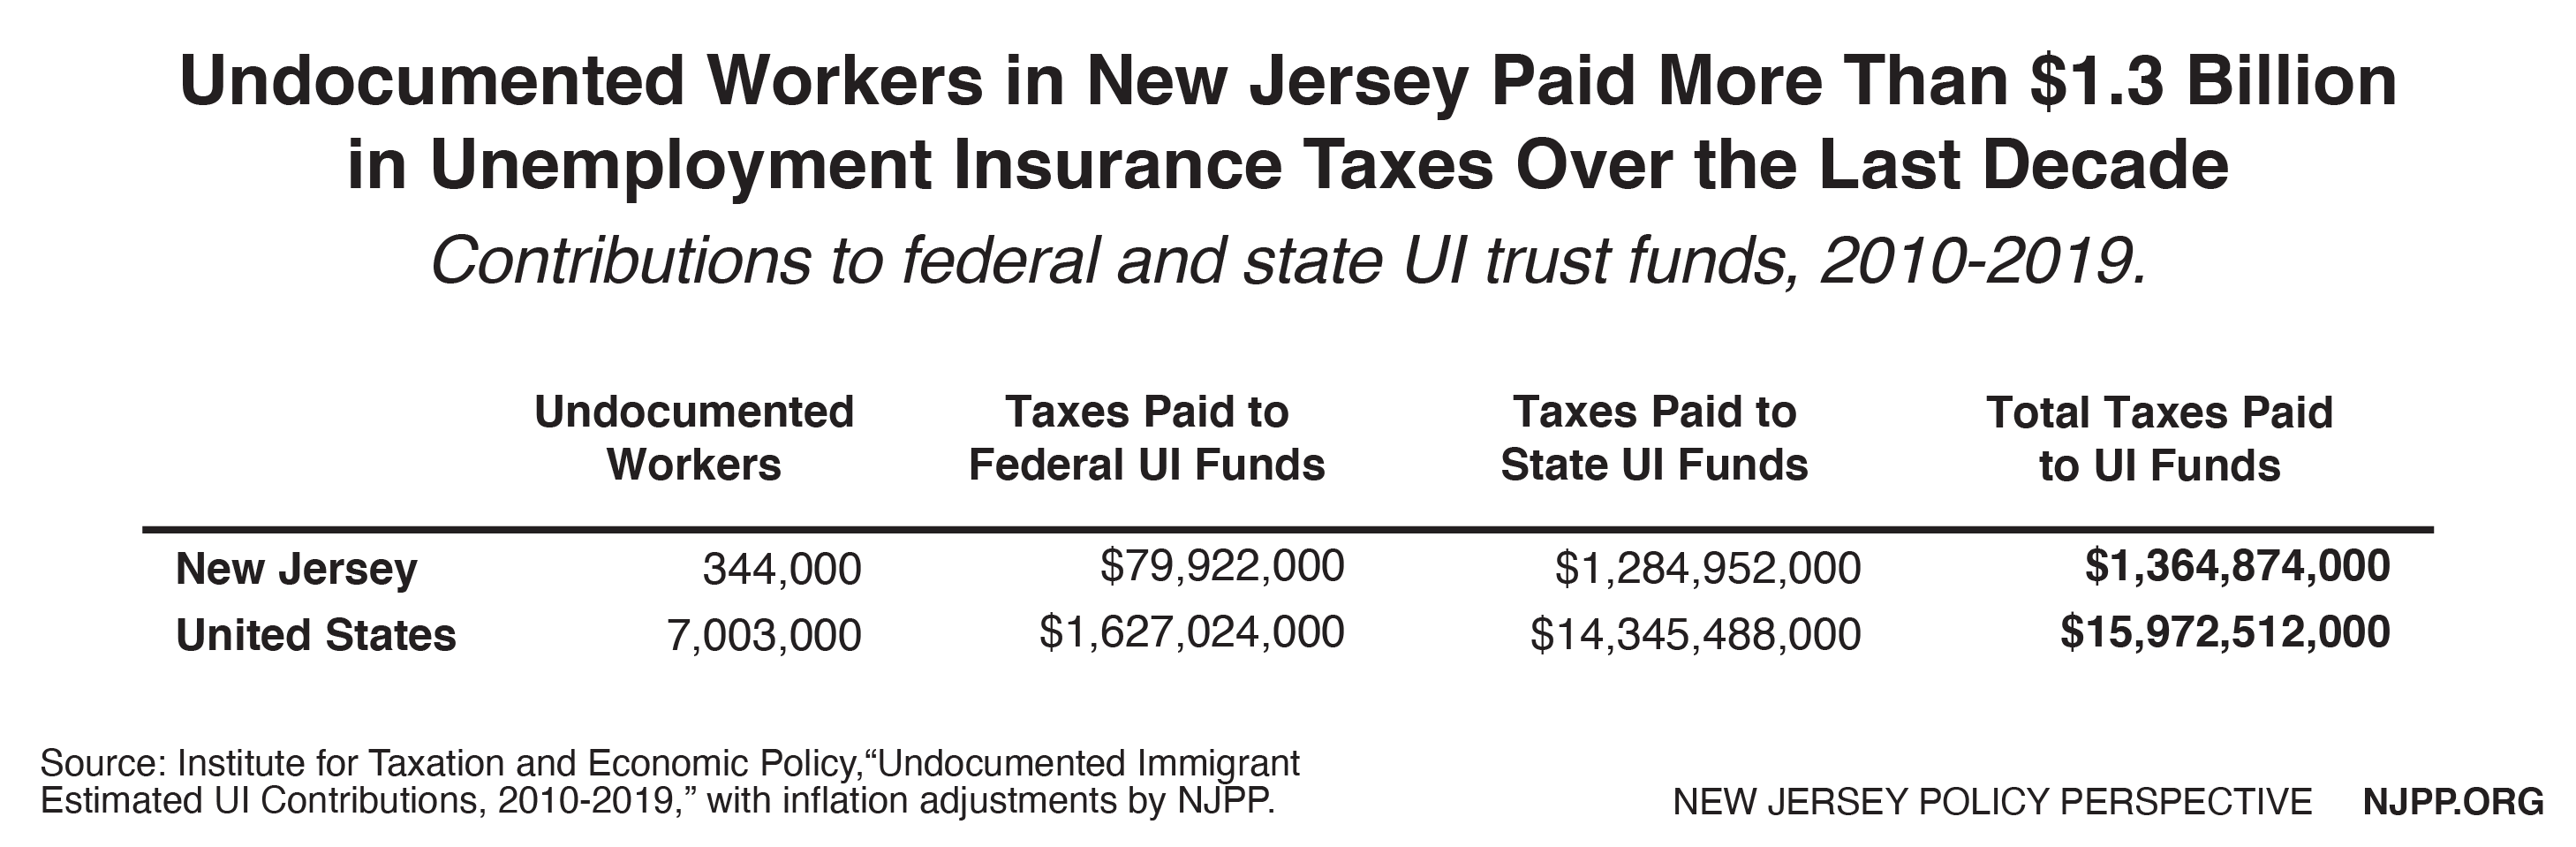 Table: Undocumented Workers in New Jersey Paid More Than $1.3 Billion in Unemployment Insurance Taxes Over the Last Decade